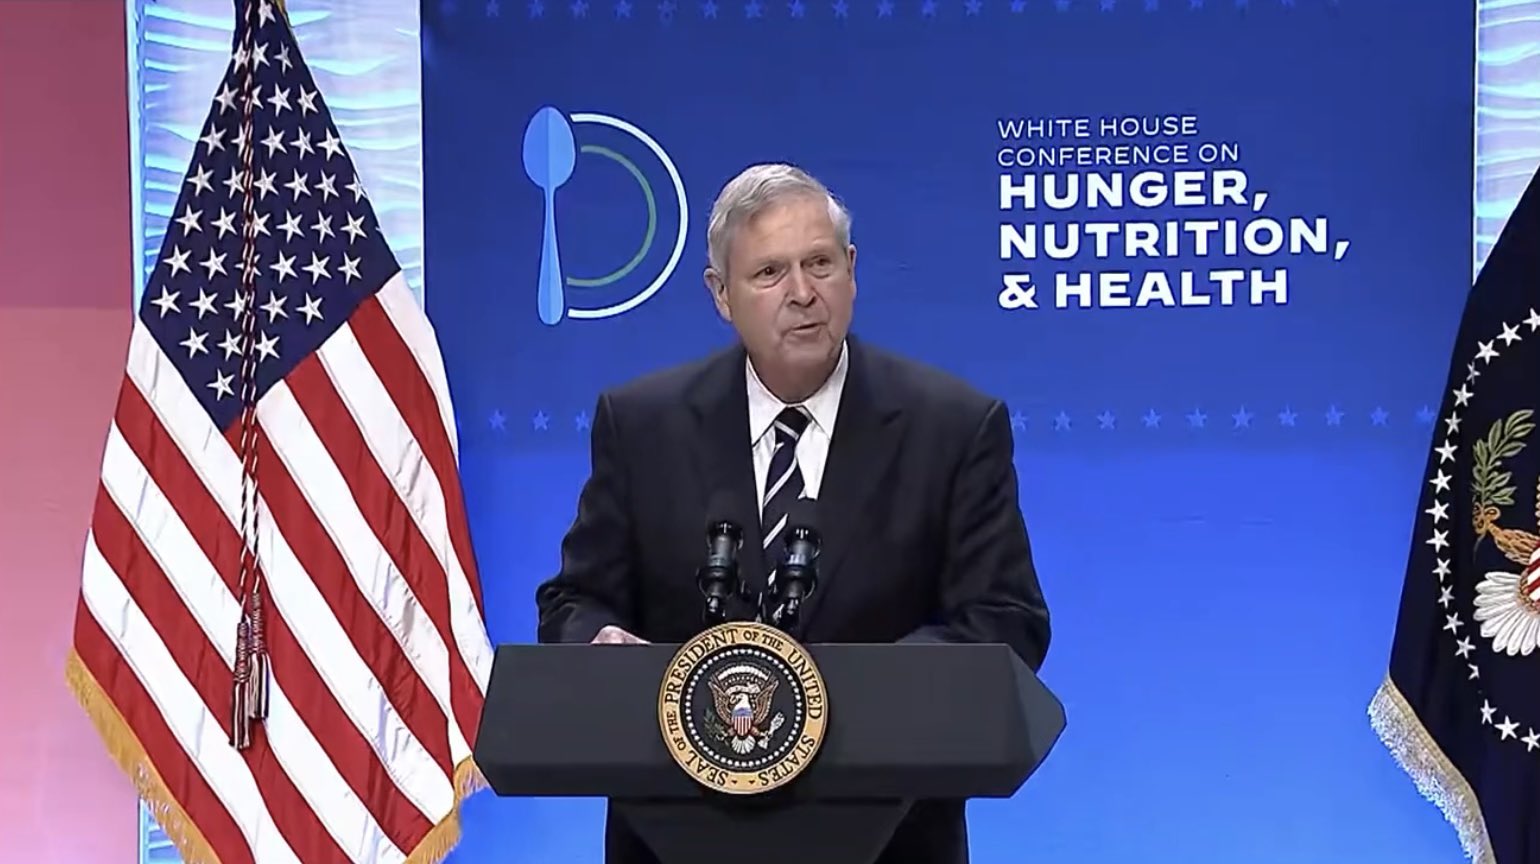 Secretary Vilsack speaking at the White House Conference on Hunger, Nutrition, and Health